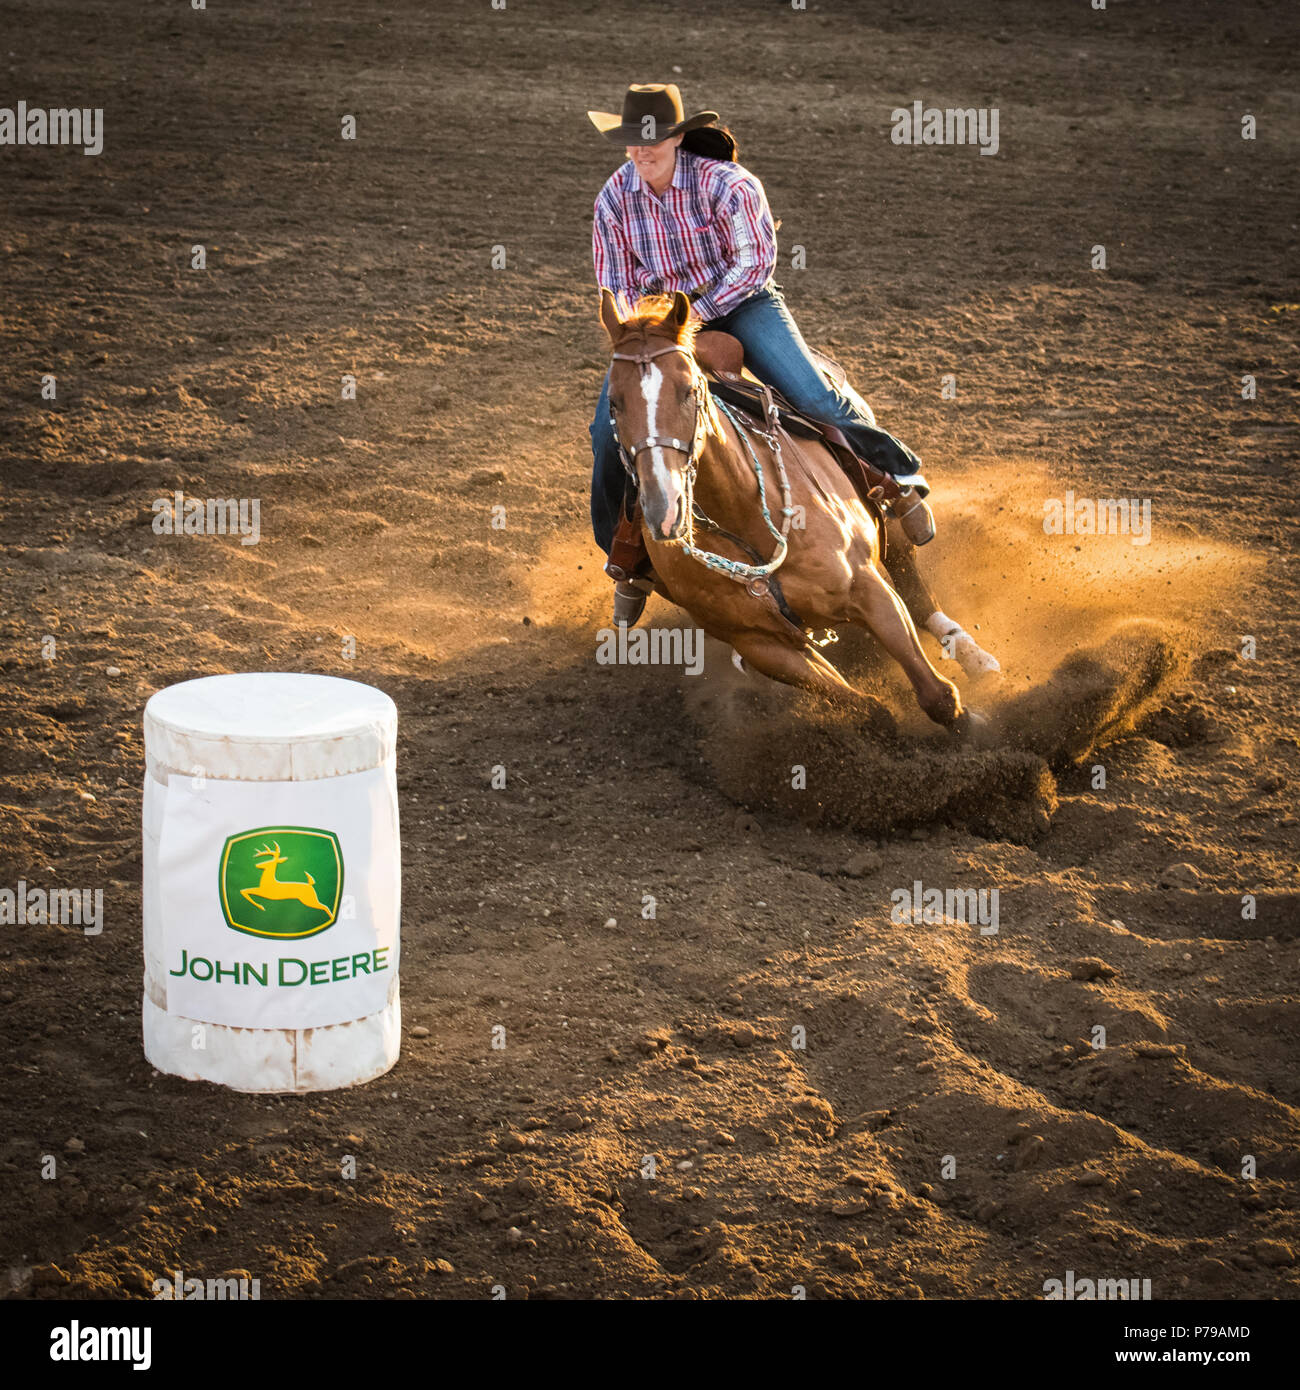 A competitor and her chestnut coloured horse race around a barrel at the Airdrie Pro Rodeo. Stock Photo